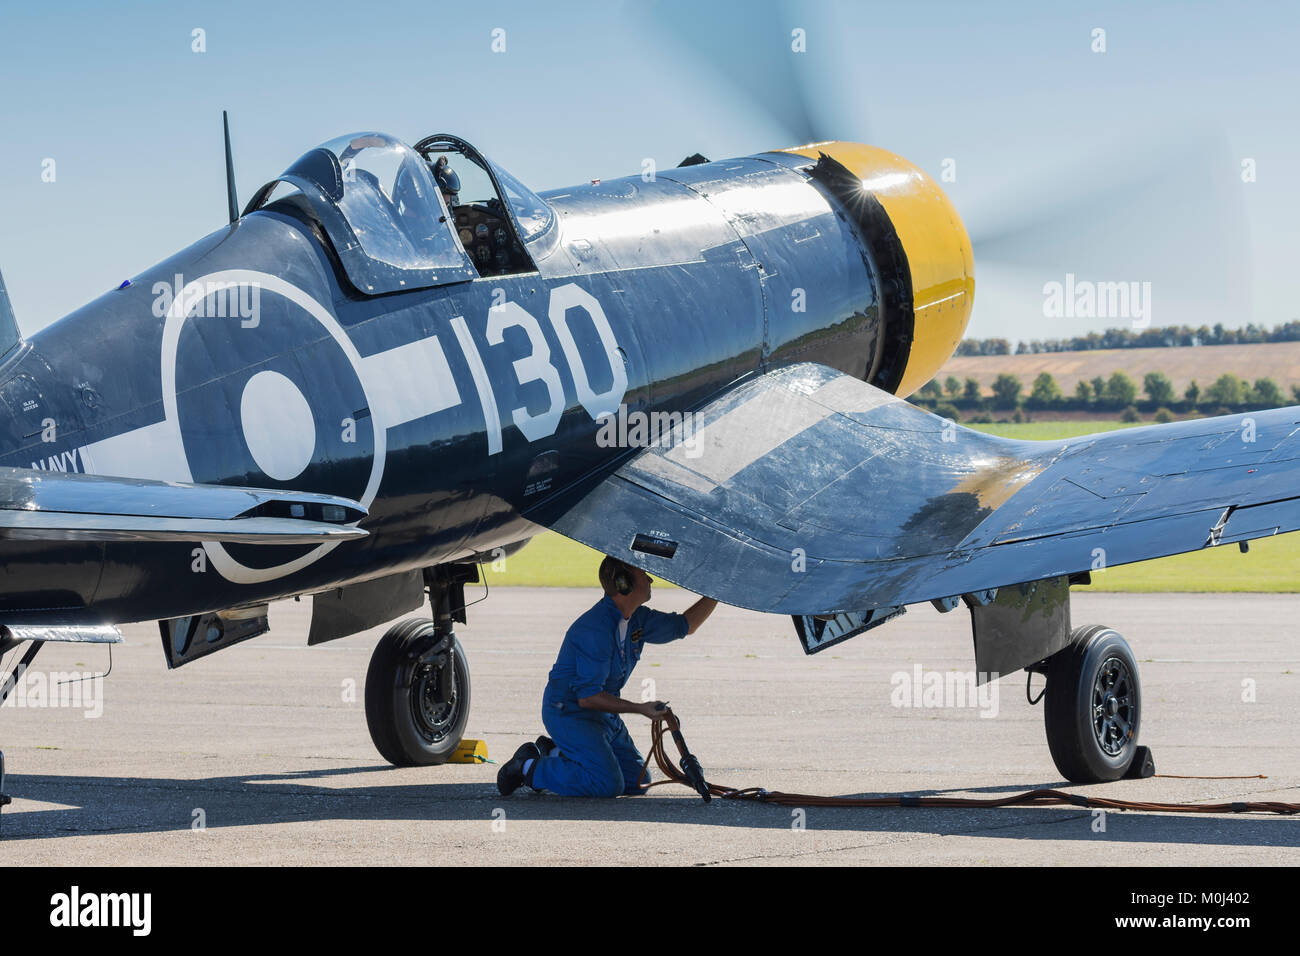 Goodyear Corsair FG-1D aircraft on the apron with ground crew technician prior to flight on September 22nd 2017 at Duxford, Cambridgeshire, UK Stock Photo